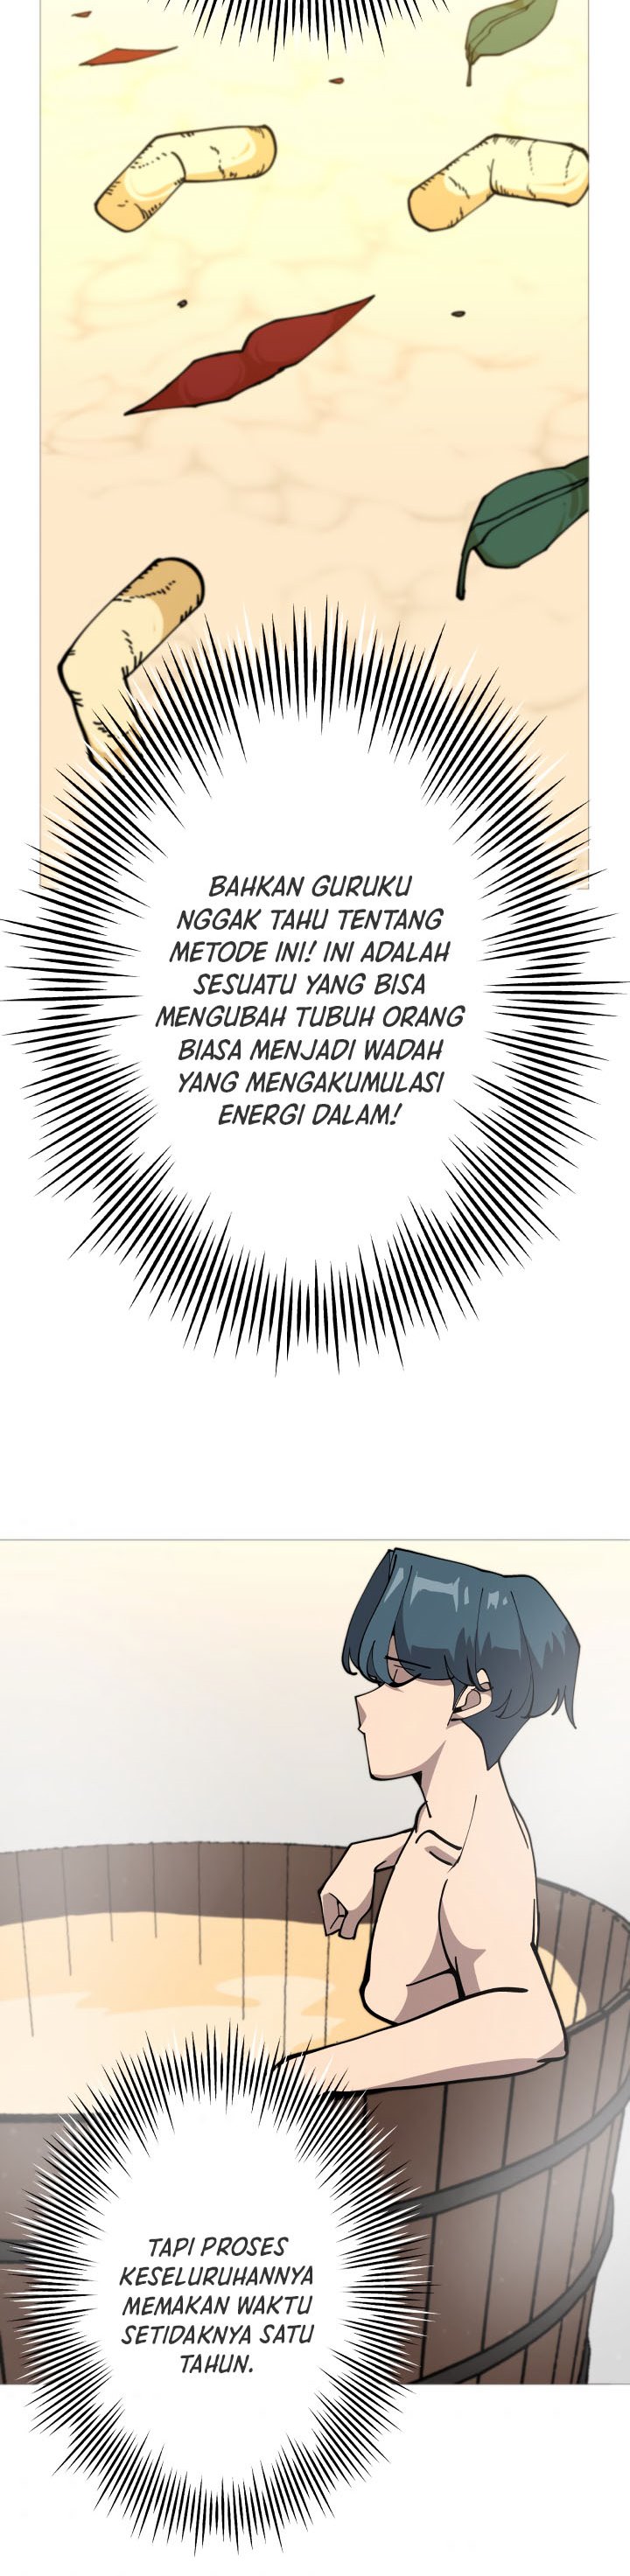 Dilarang COPAS - situs resmi www.mangacanblog.com - Komik the story of a low rank soldier becoming a monarch 022 - chapter 22 23 Indonesia the story of a low rank soldier becoming a monarch 022 - chapter 22 Terbaru 36|Baca Manga Komik Indonesia|Mangacan